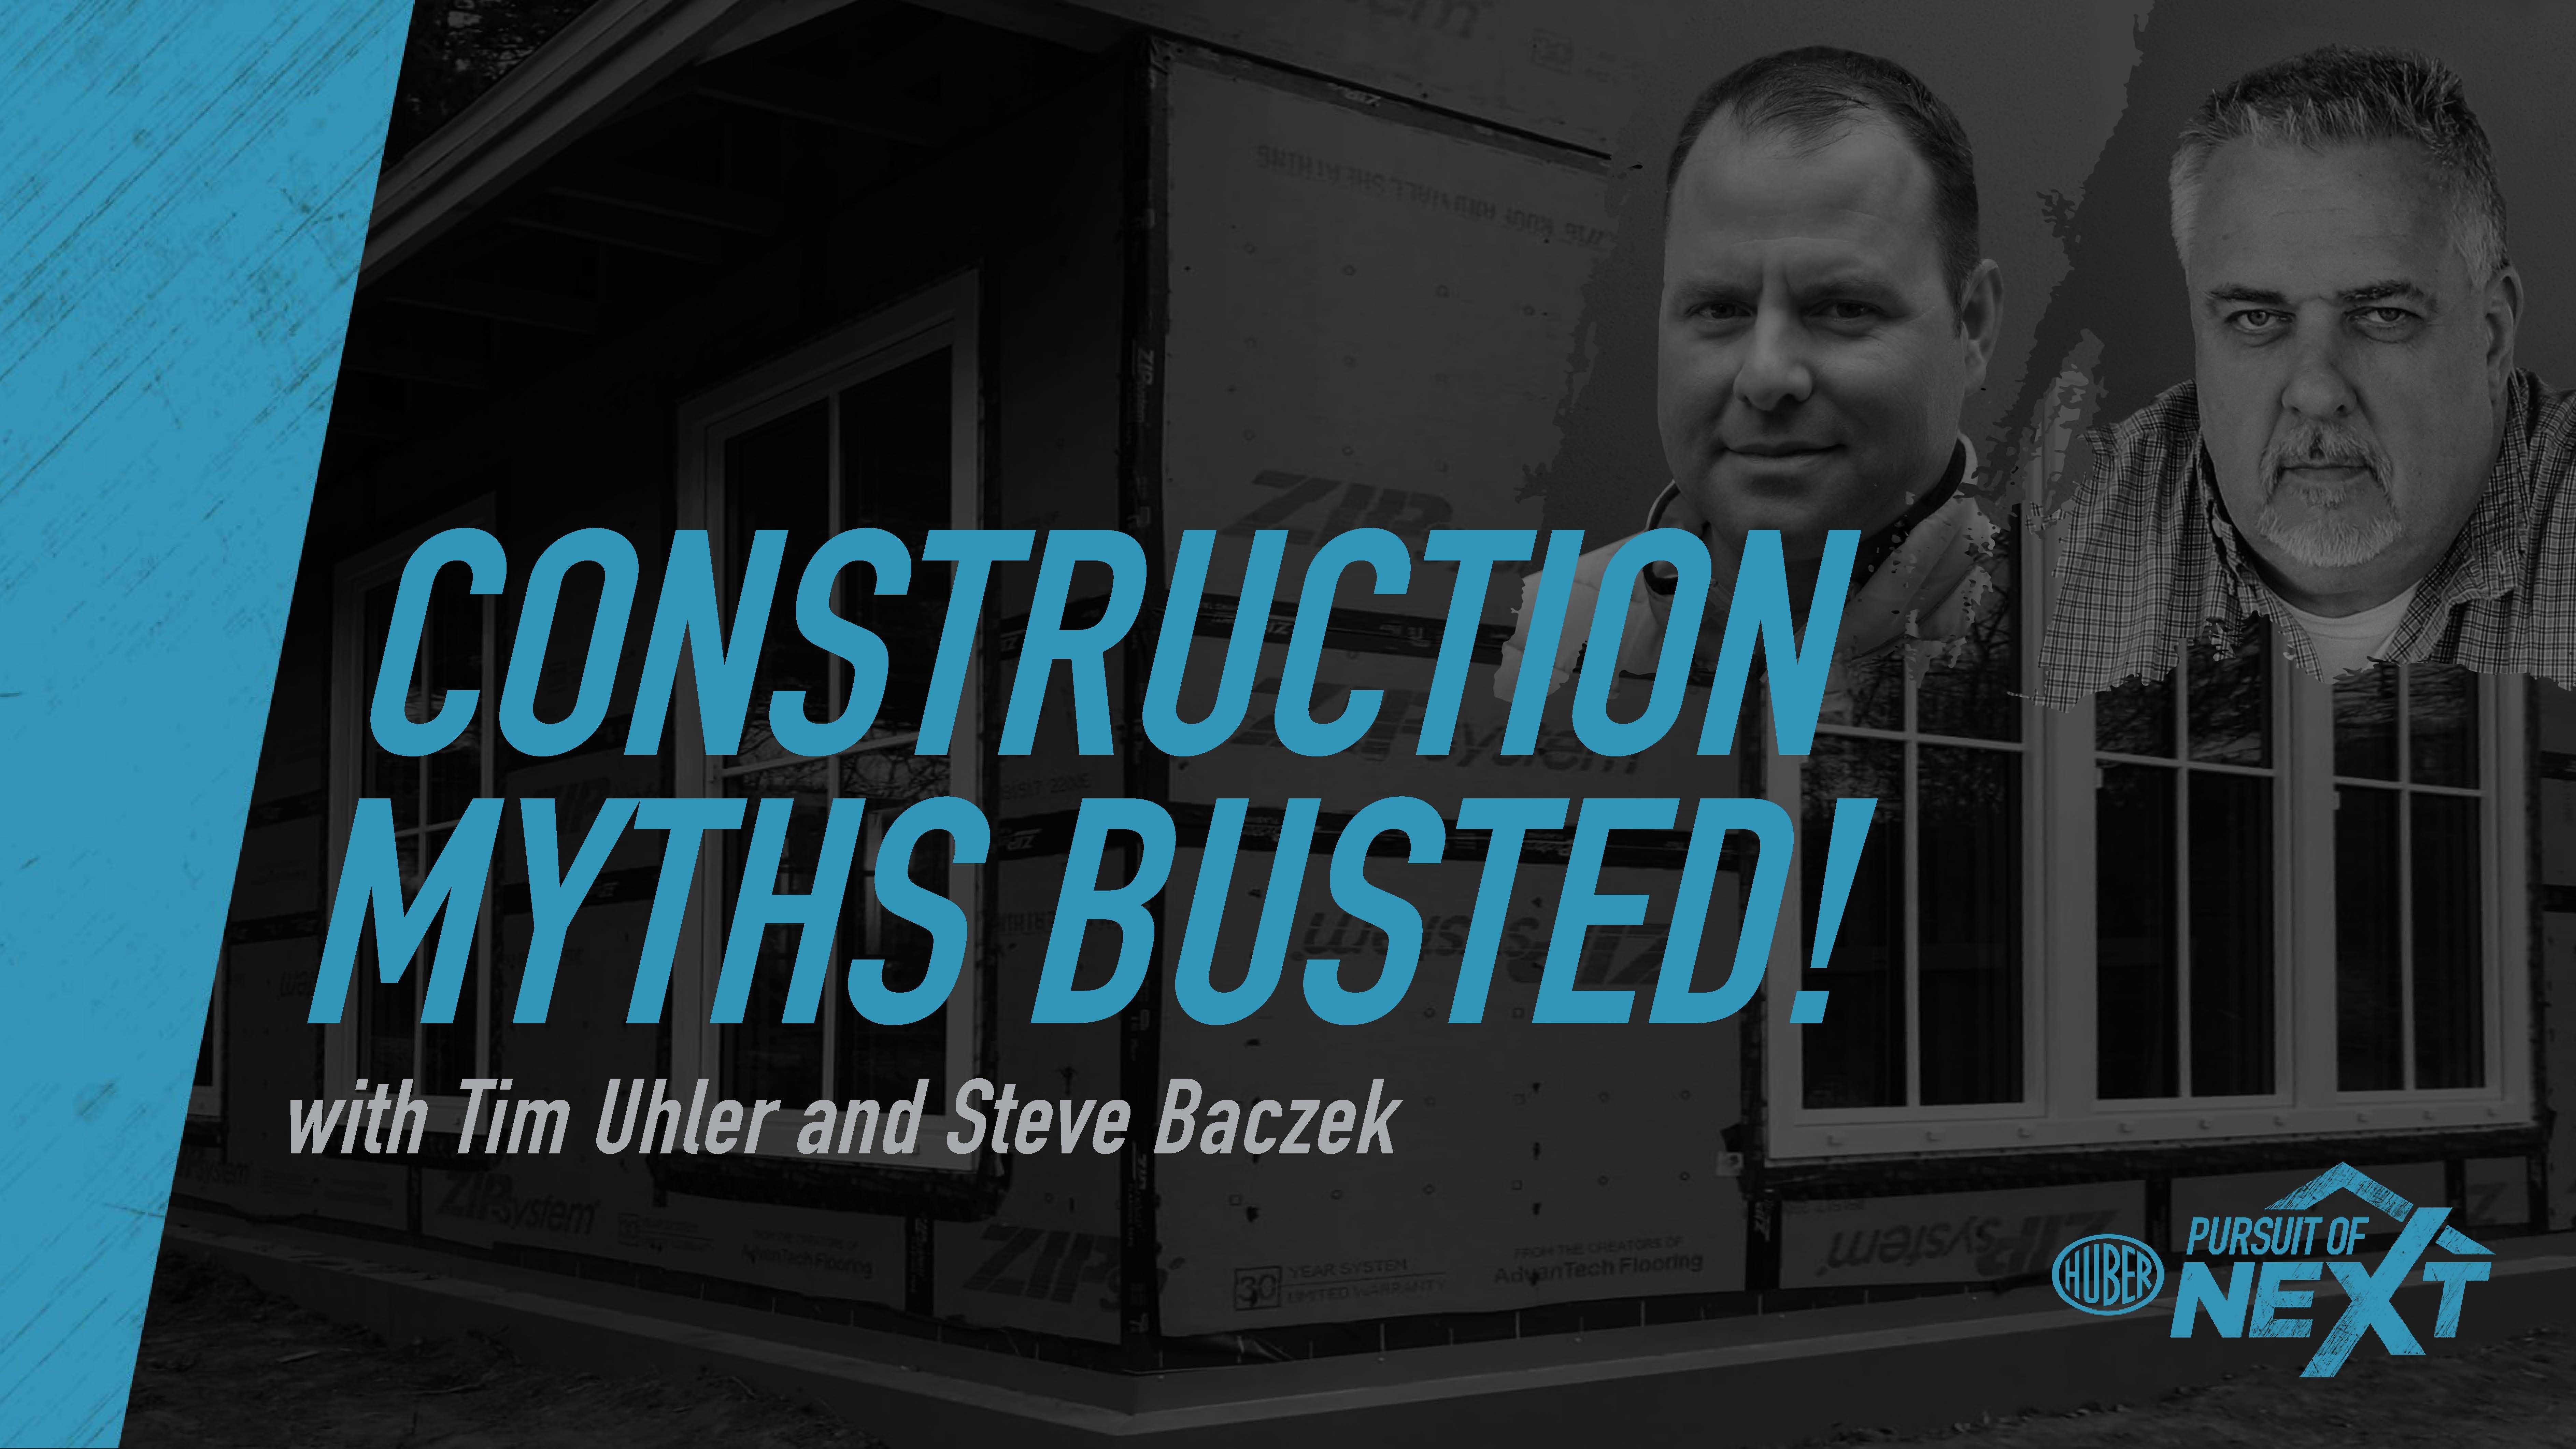 Construction Myths Busted